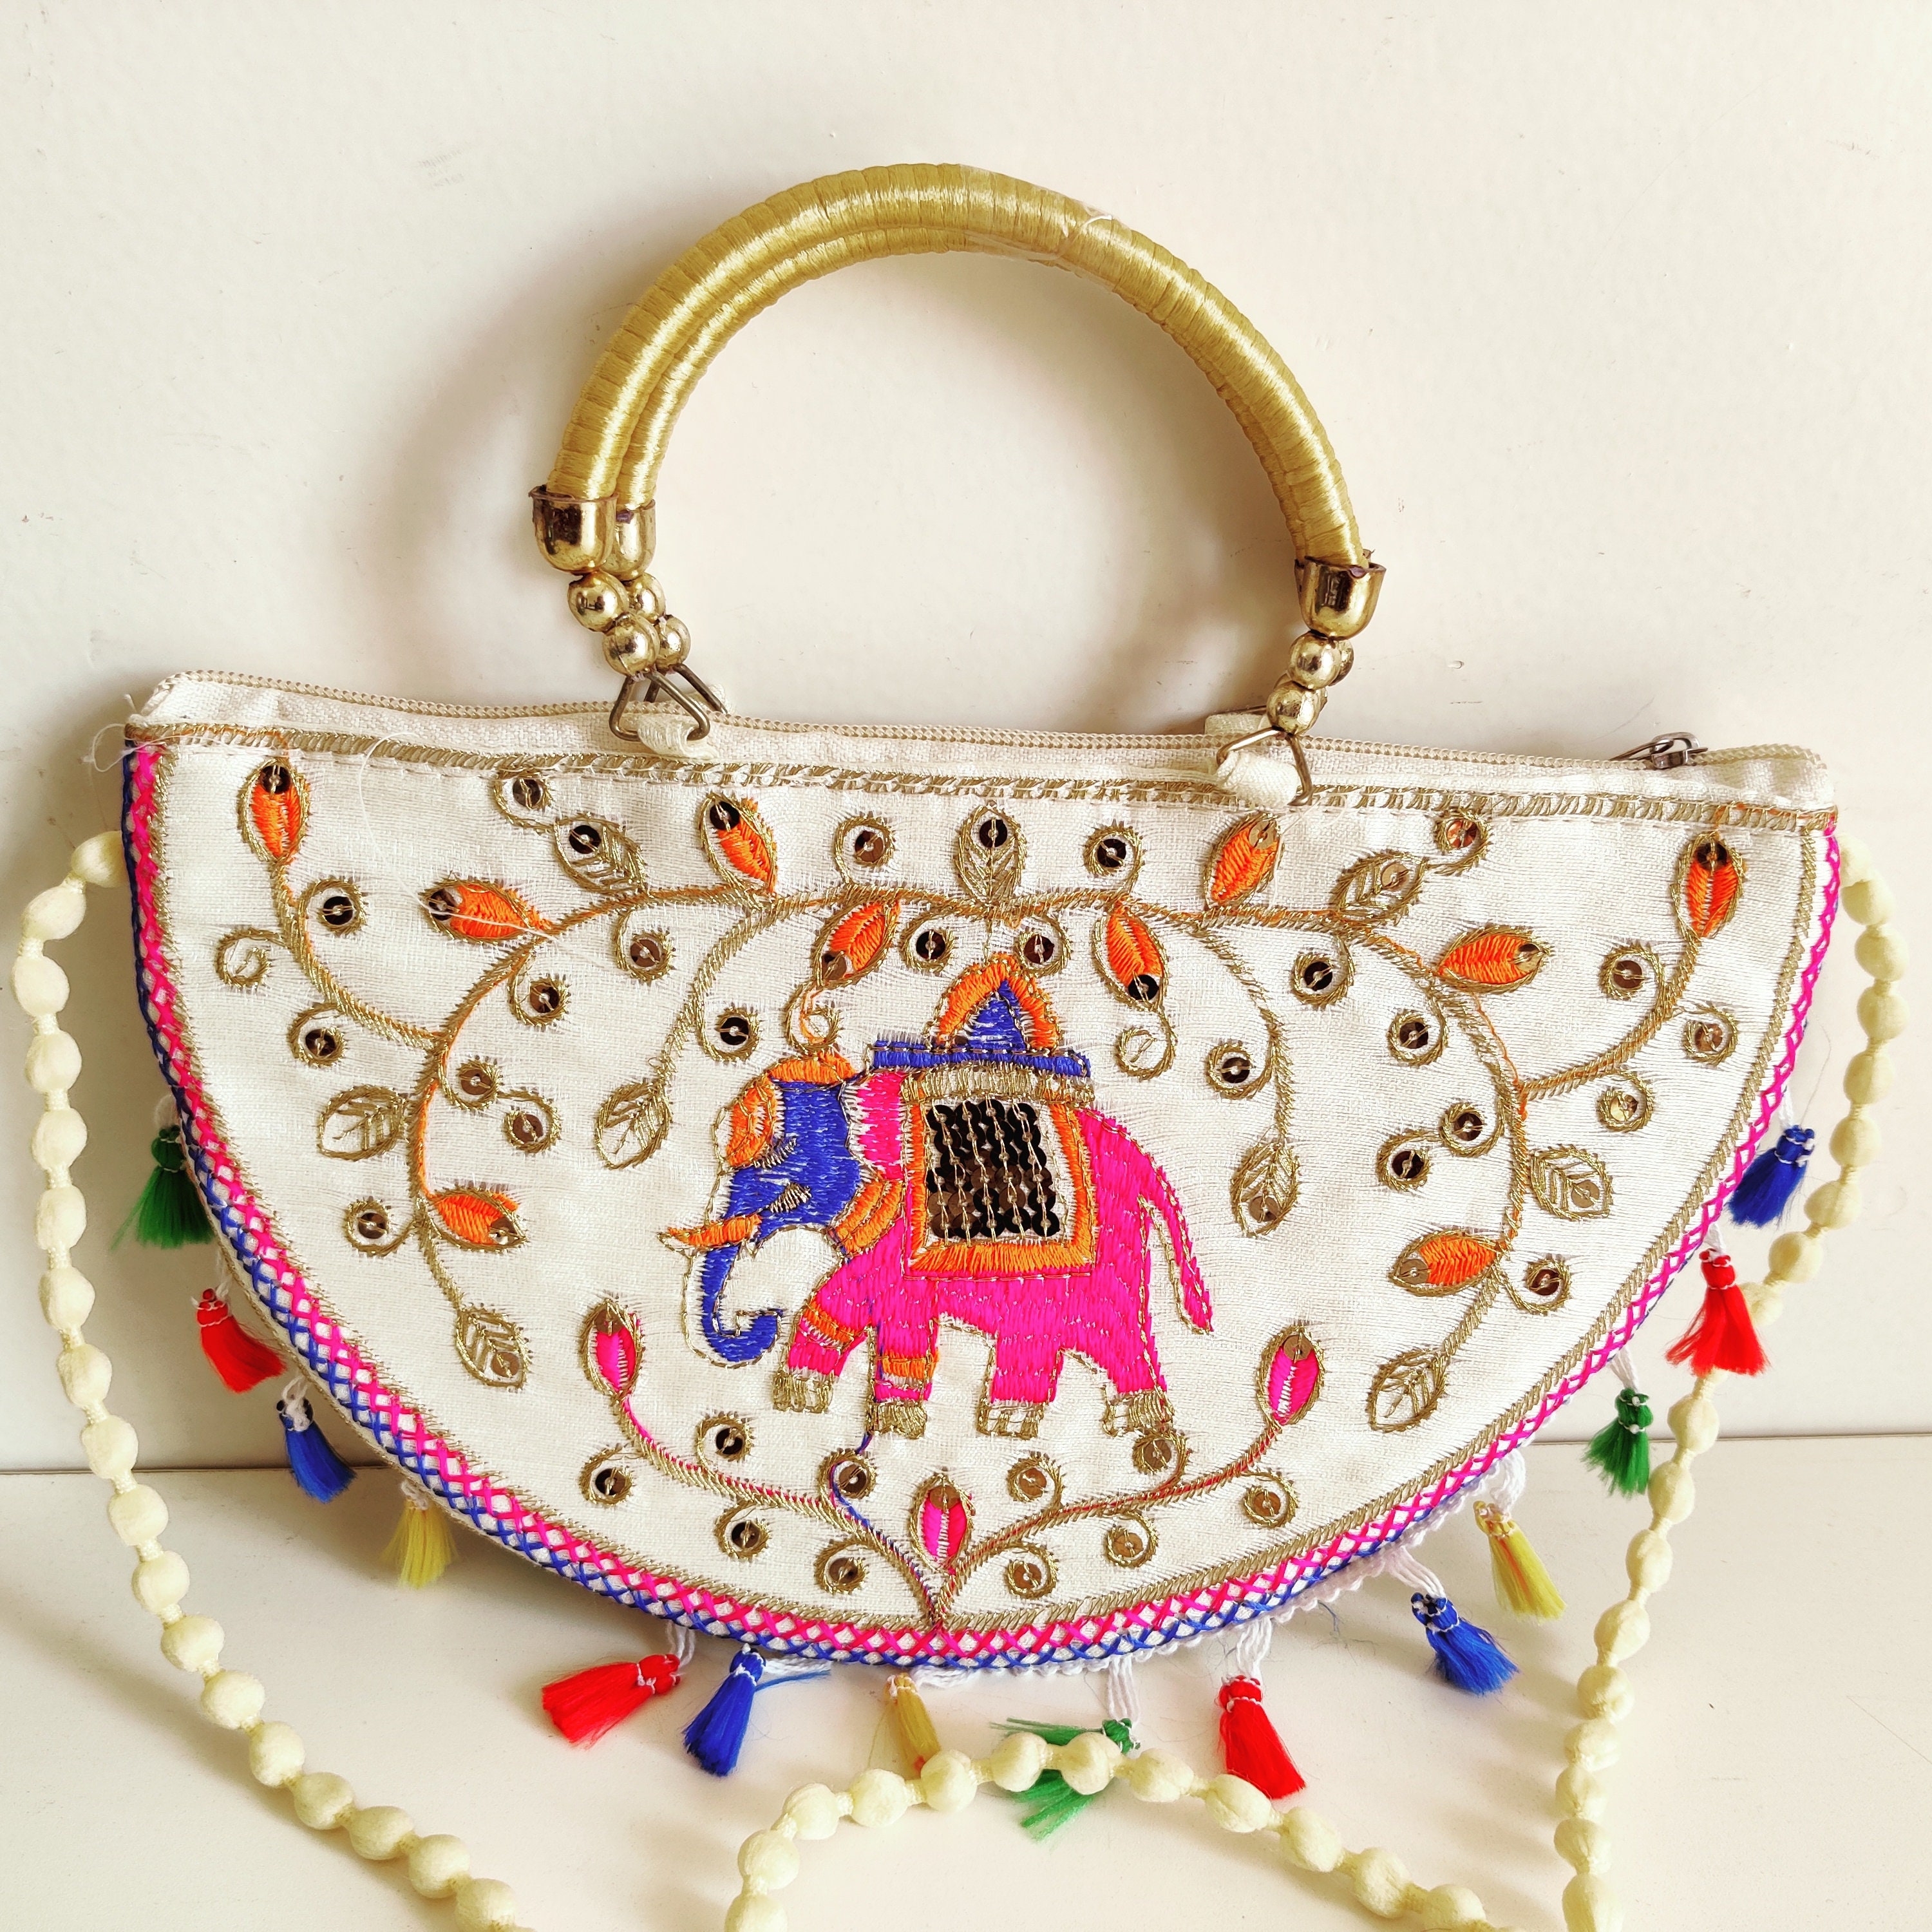 Traditional Floral Clutch Purse, Bag With Zardozi Work, Rajasthani  Inspired, Shoulder Strap and Handle for Wedding, Evening Party and Ethnic -  Etsy